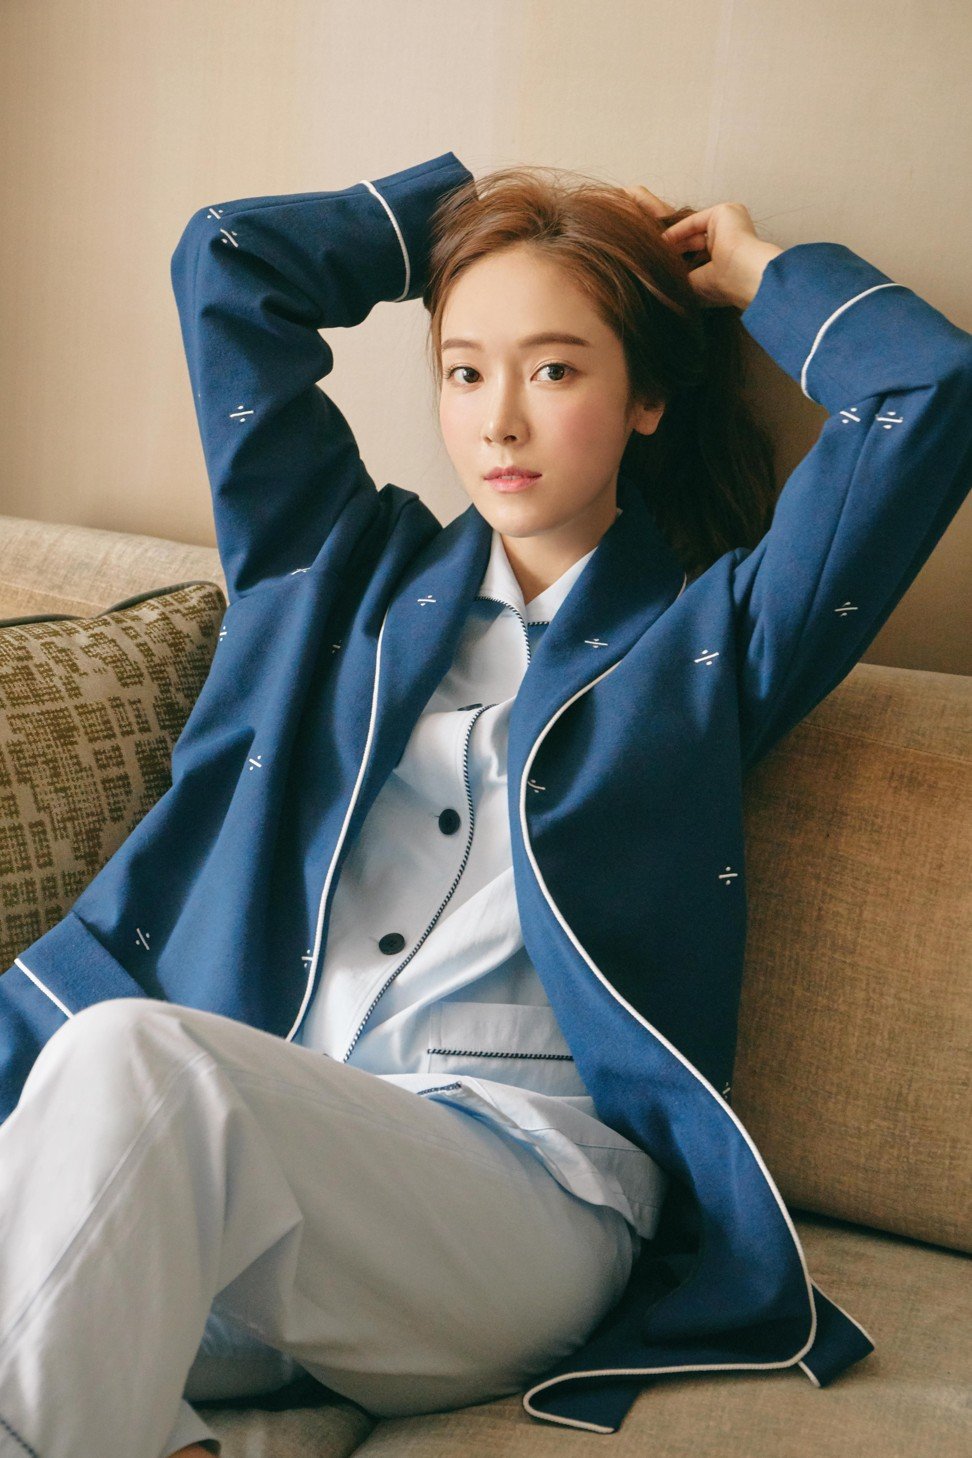 Jessica Jung first found fame in 2007 as a member of K-pop girl group Girls’ Generation